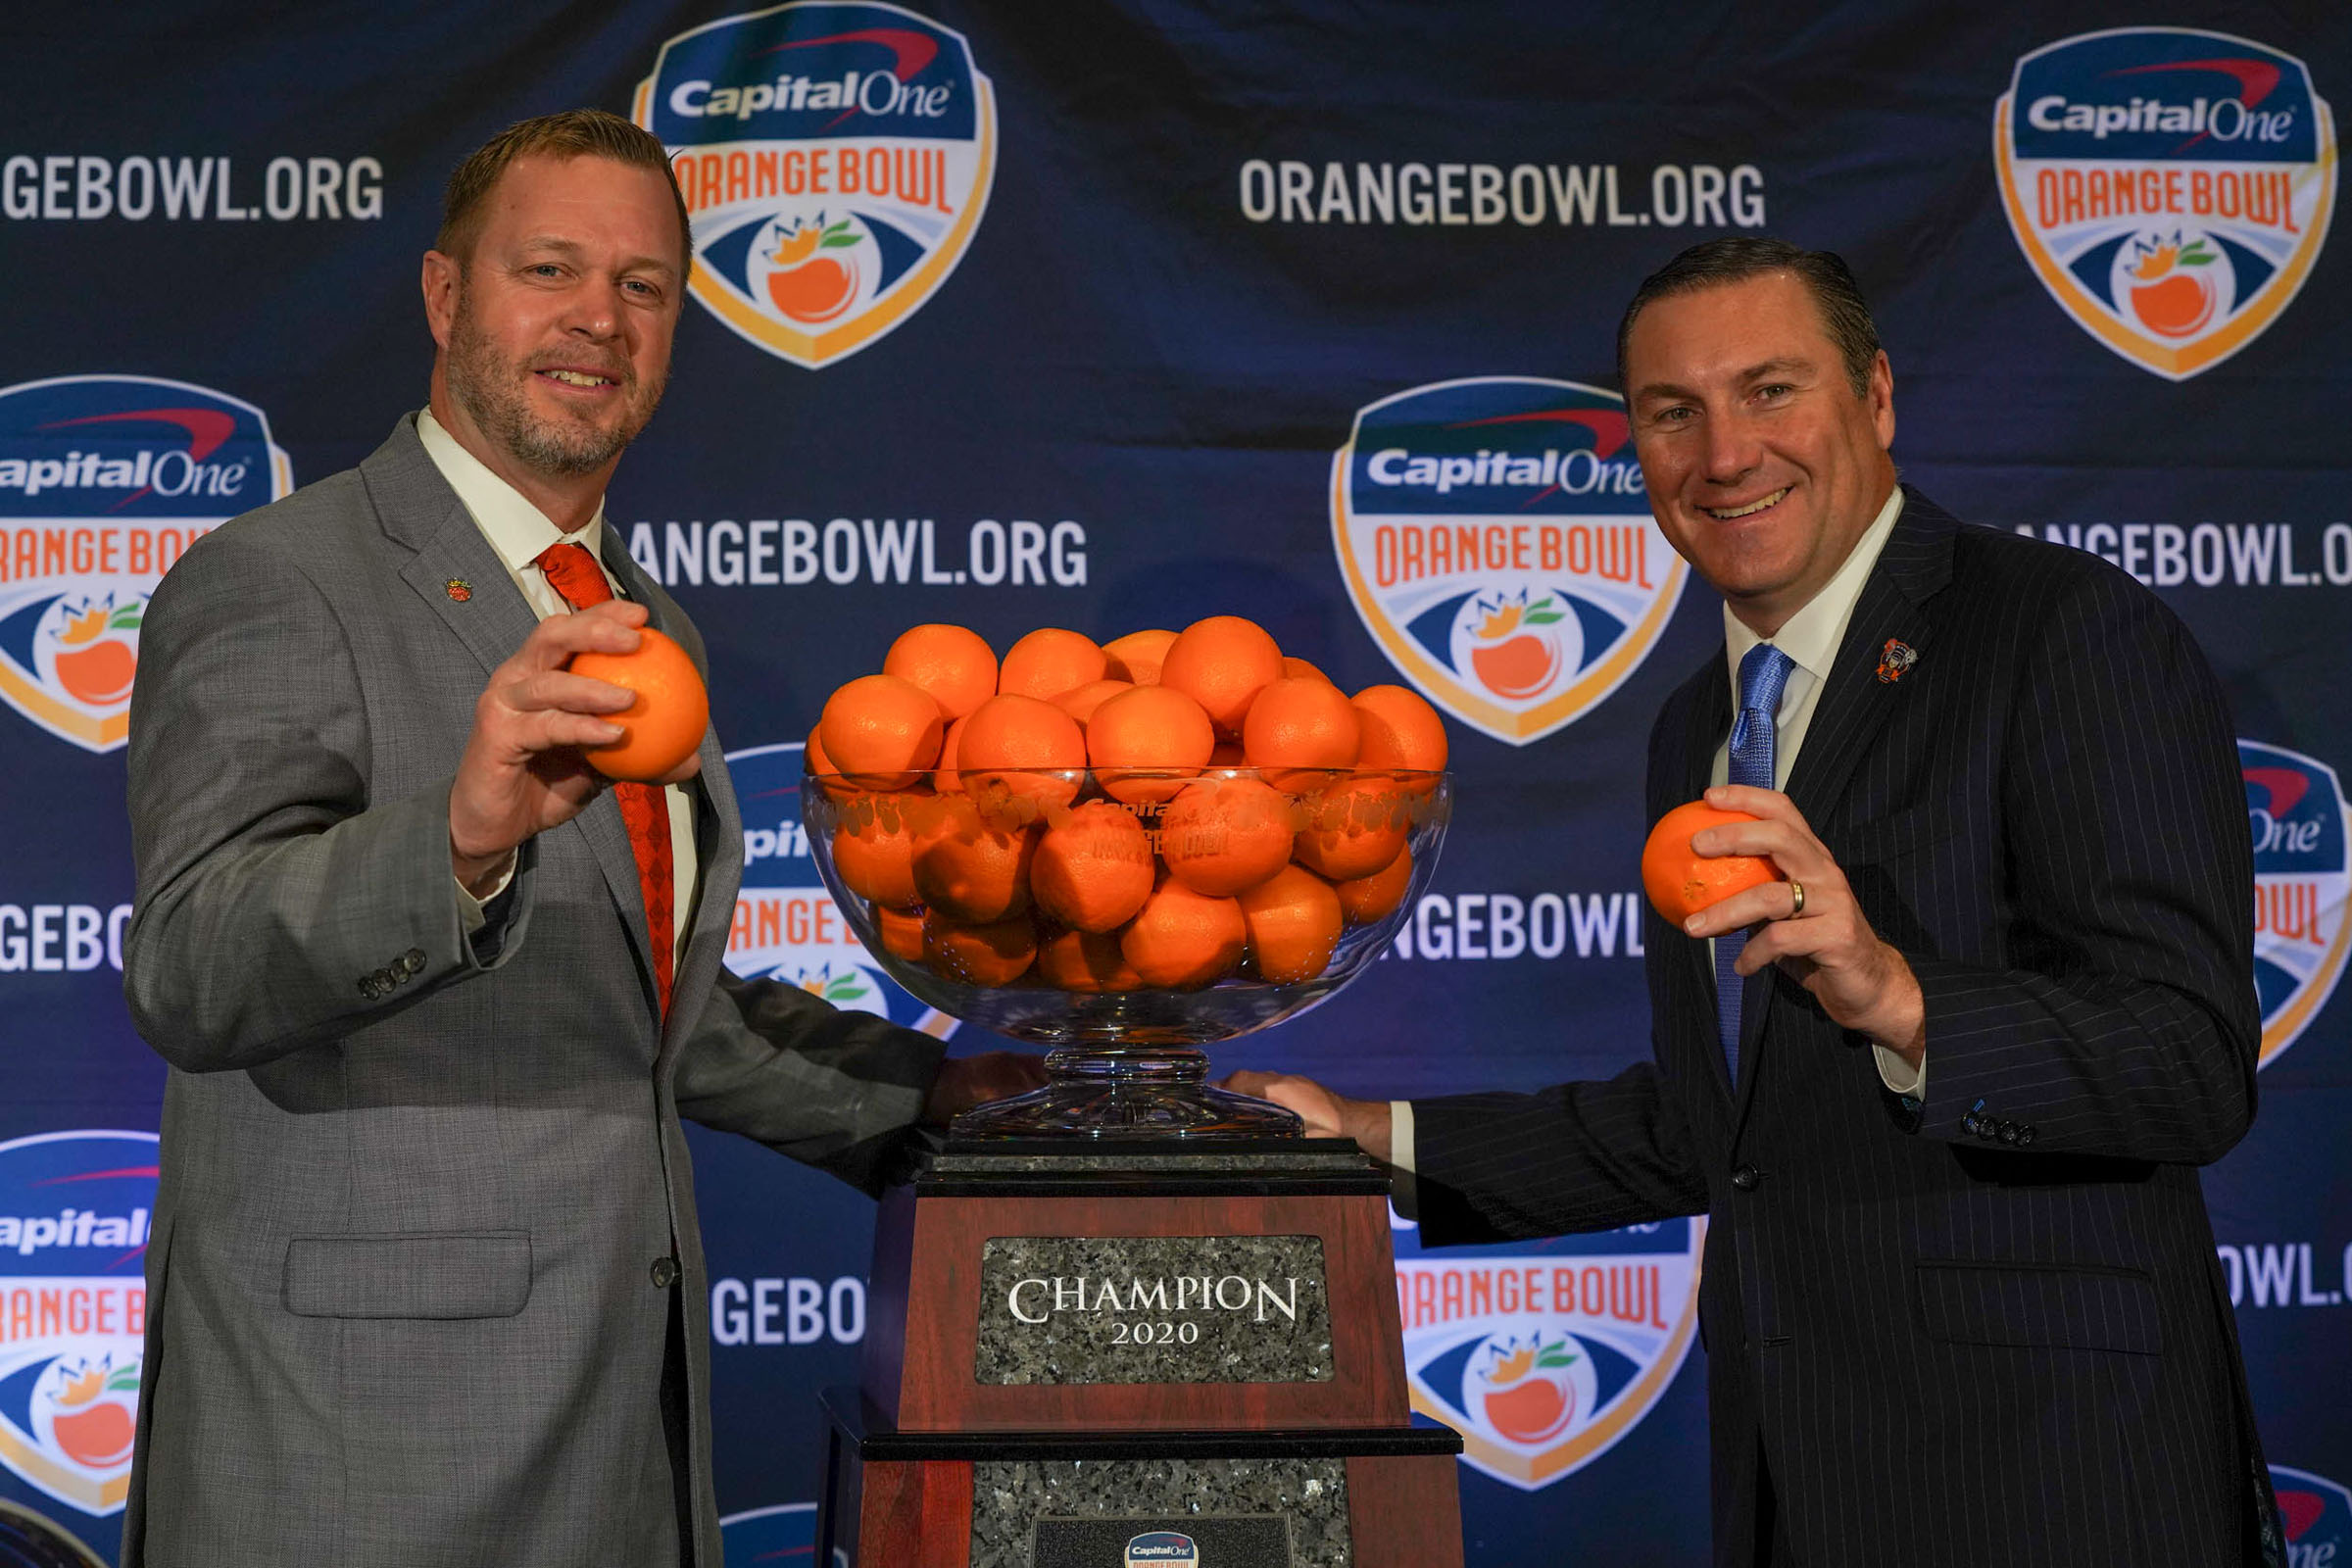 Bronco Mendenhall, left, and Dan Mullen, right pose next to a glass bowl of oranges while each holding 1 orange